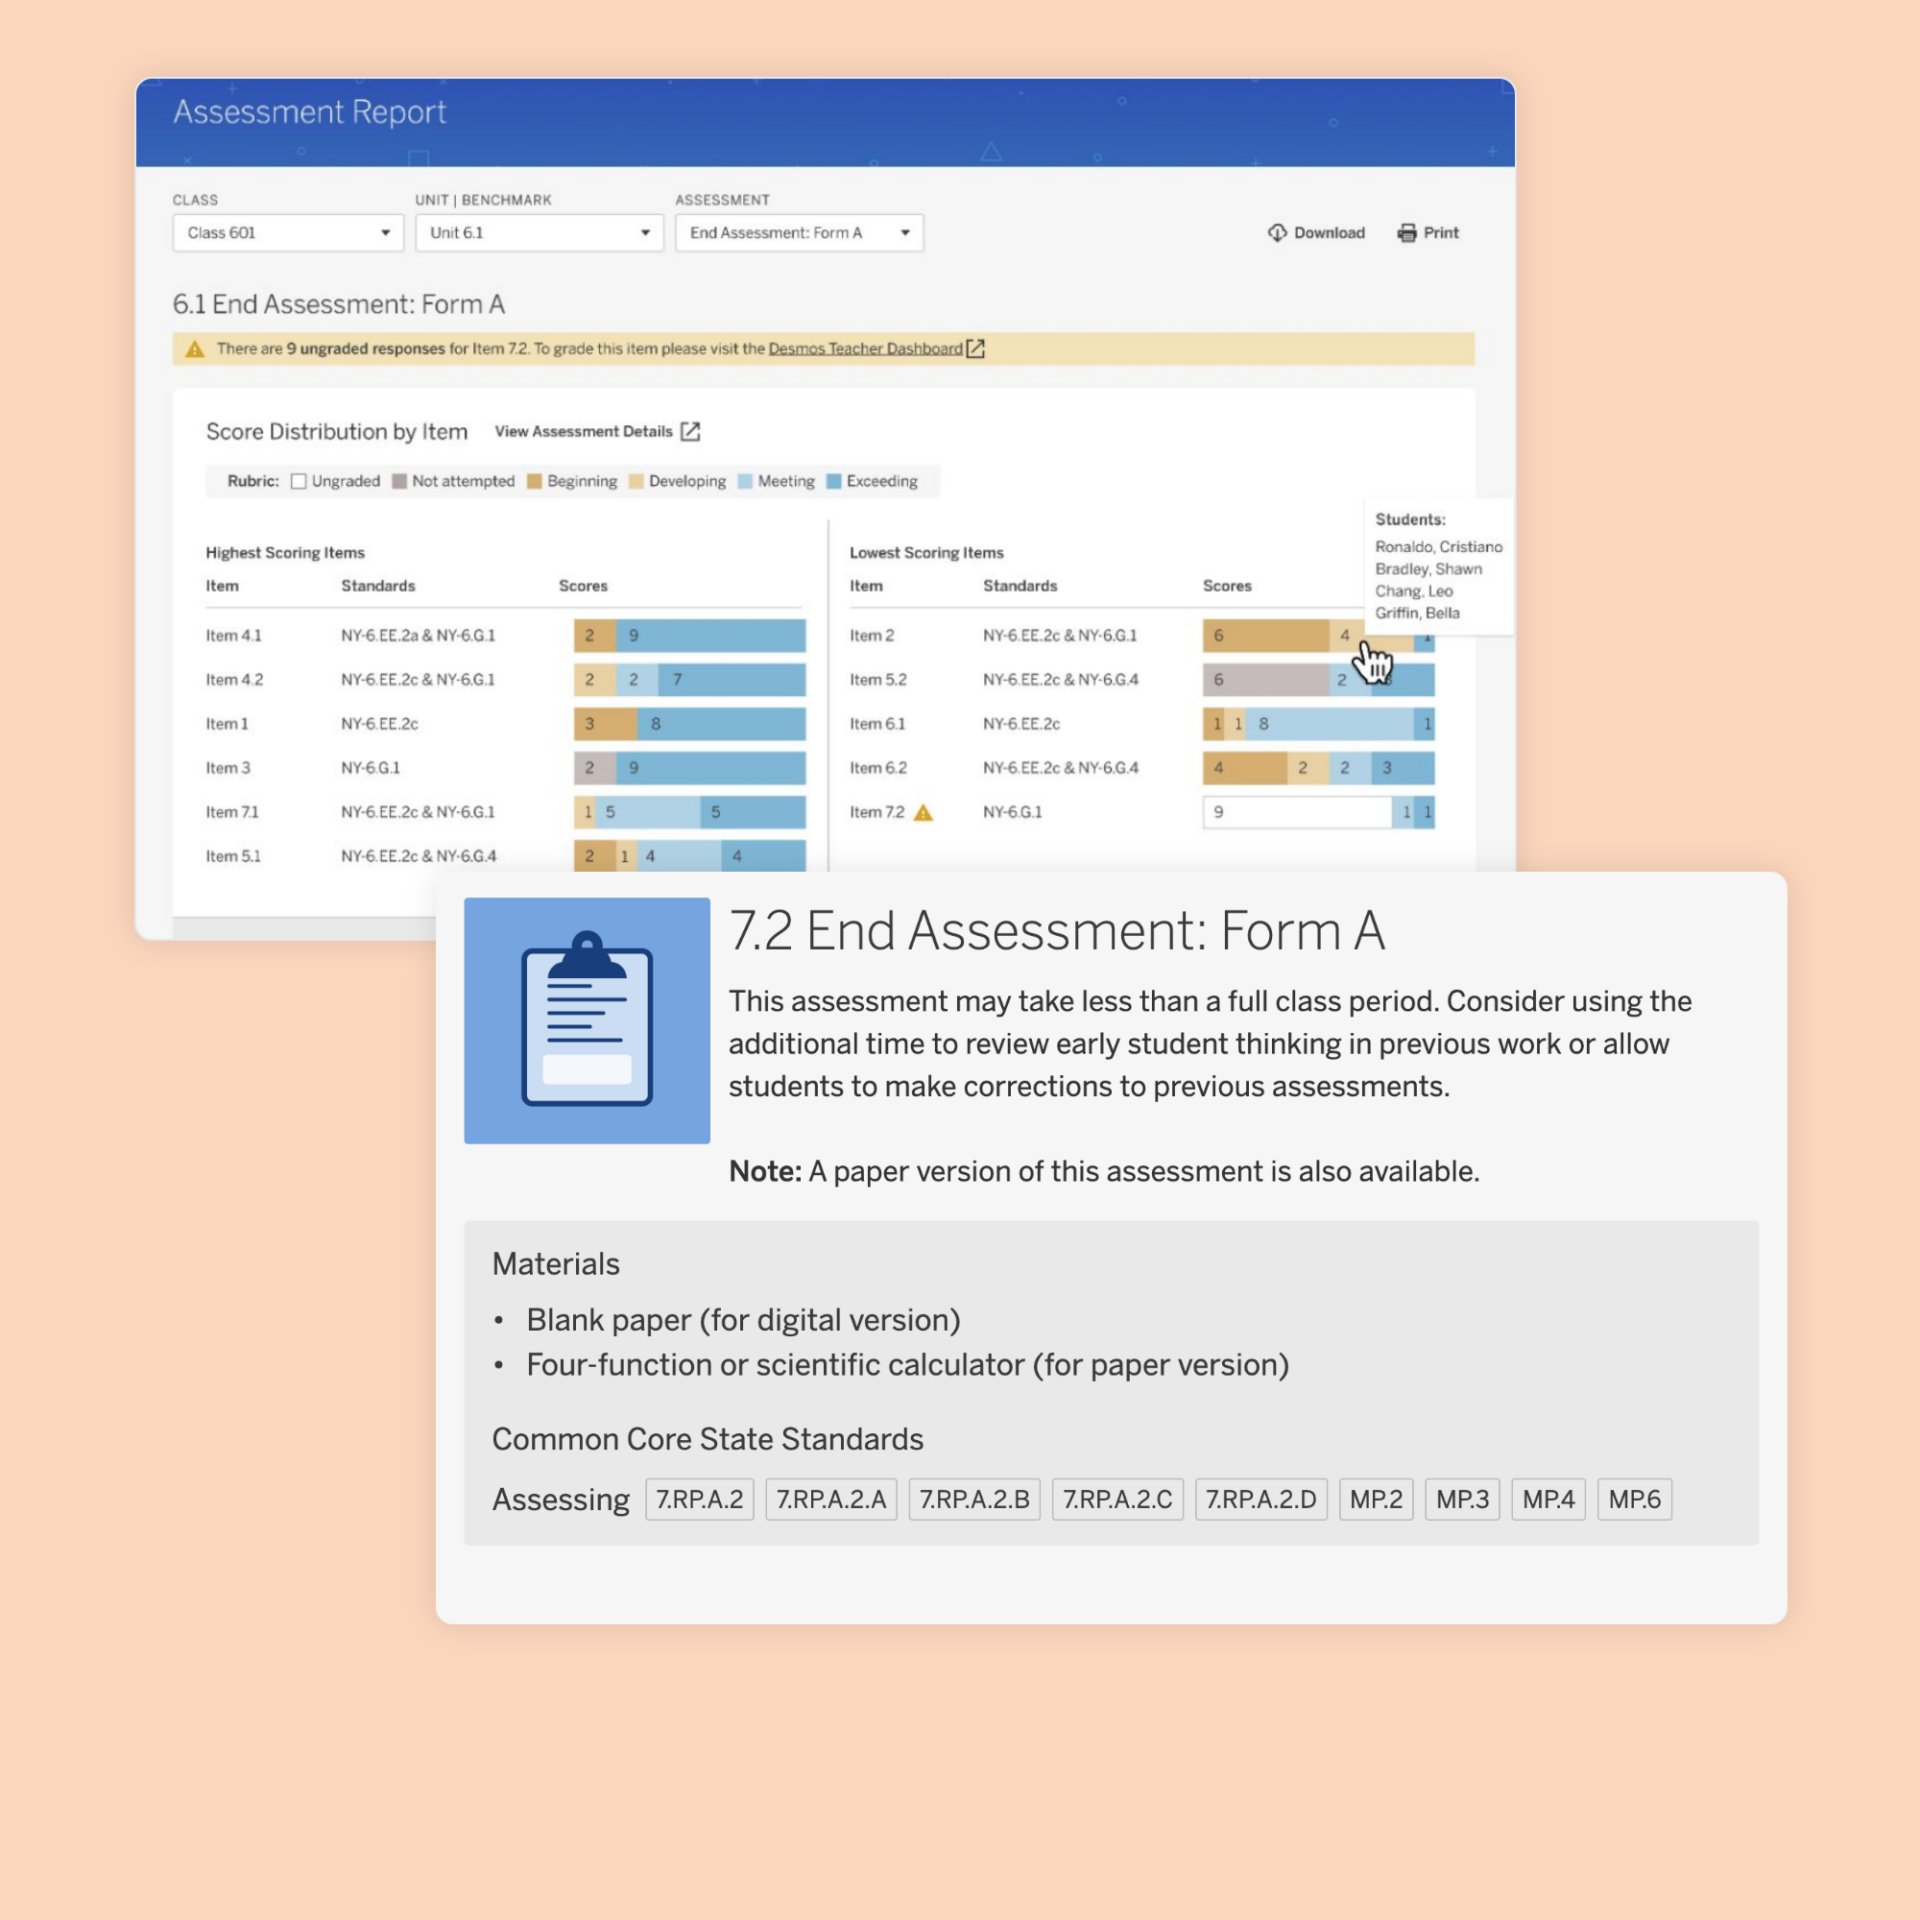 Screenshot of a digital assessment report on a computer screen, displaying tables, charts, and text sections concerning 